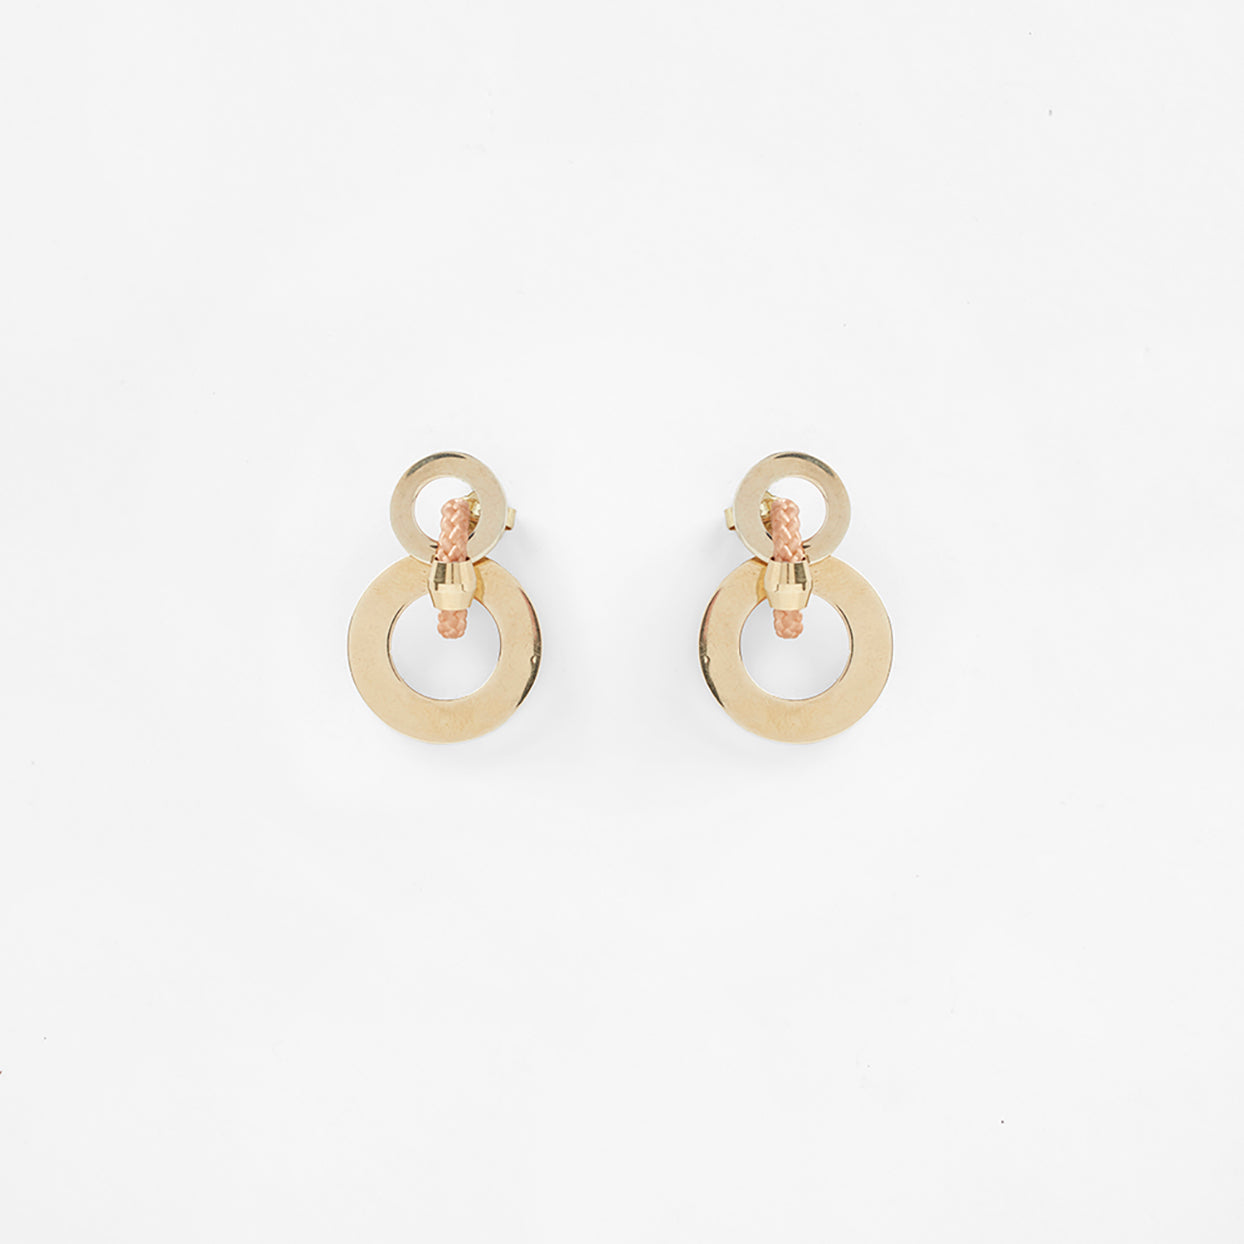 PaPichulik | Ete Earrings with Brass and Ropeichulik | Ete Earrings Sand